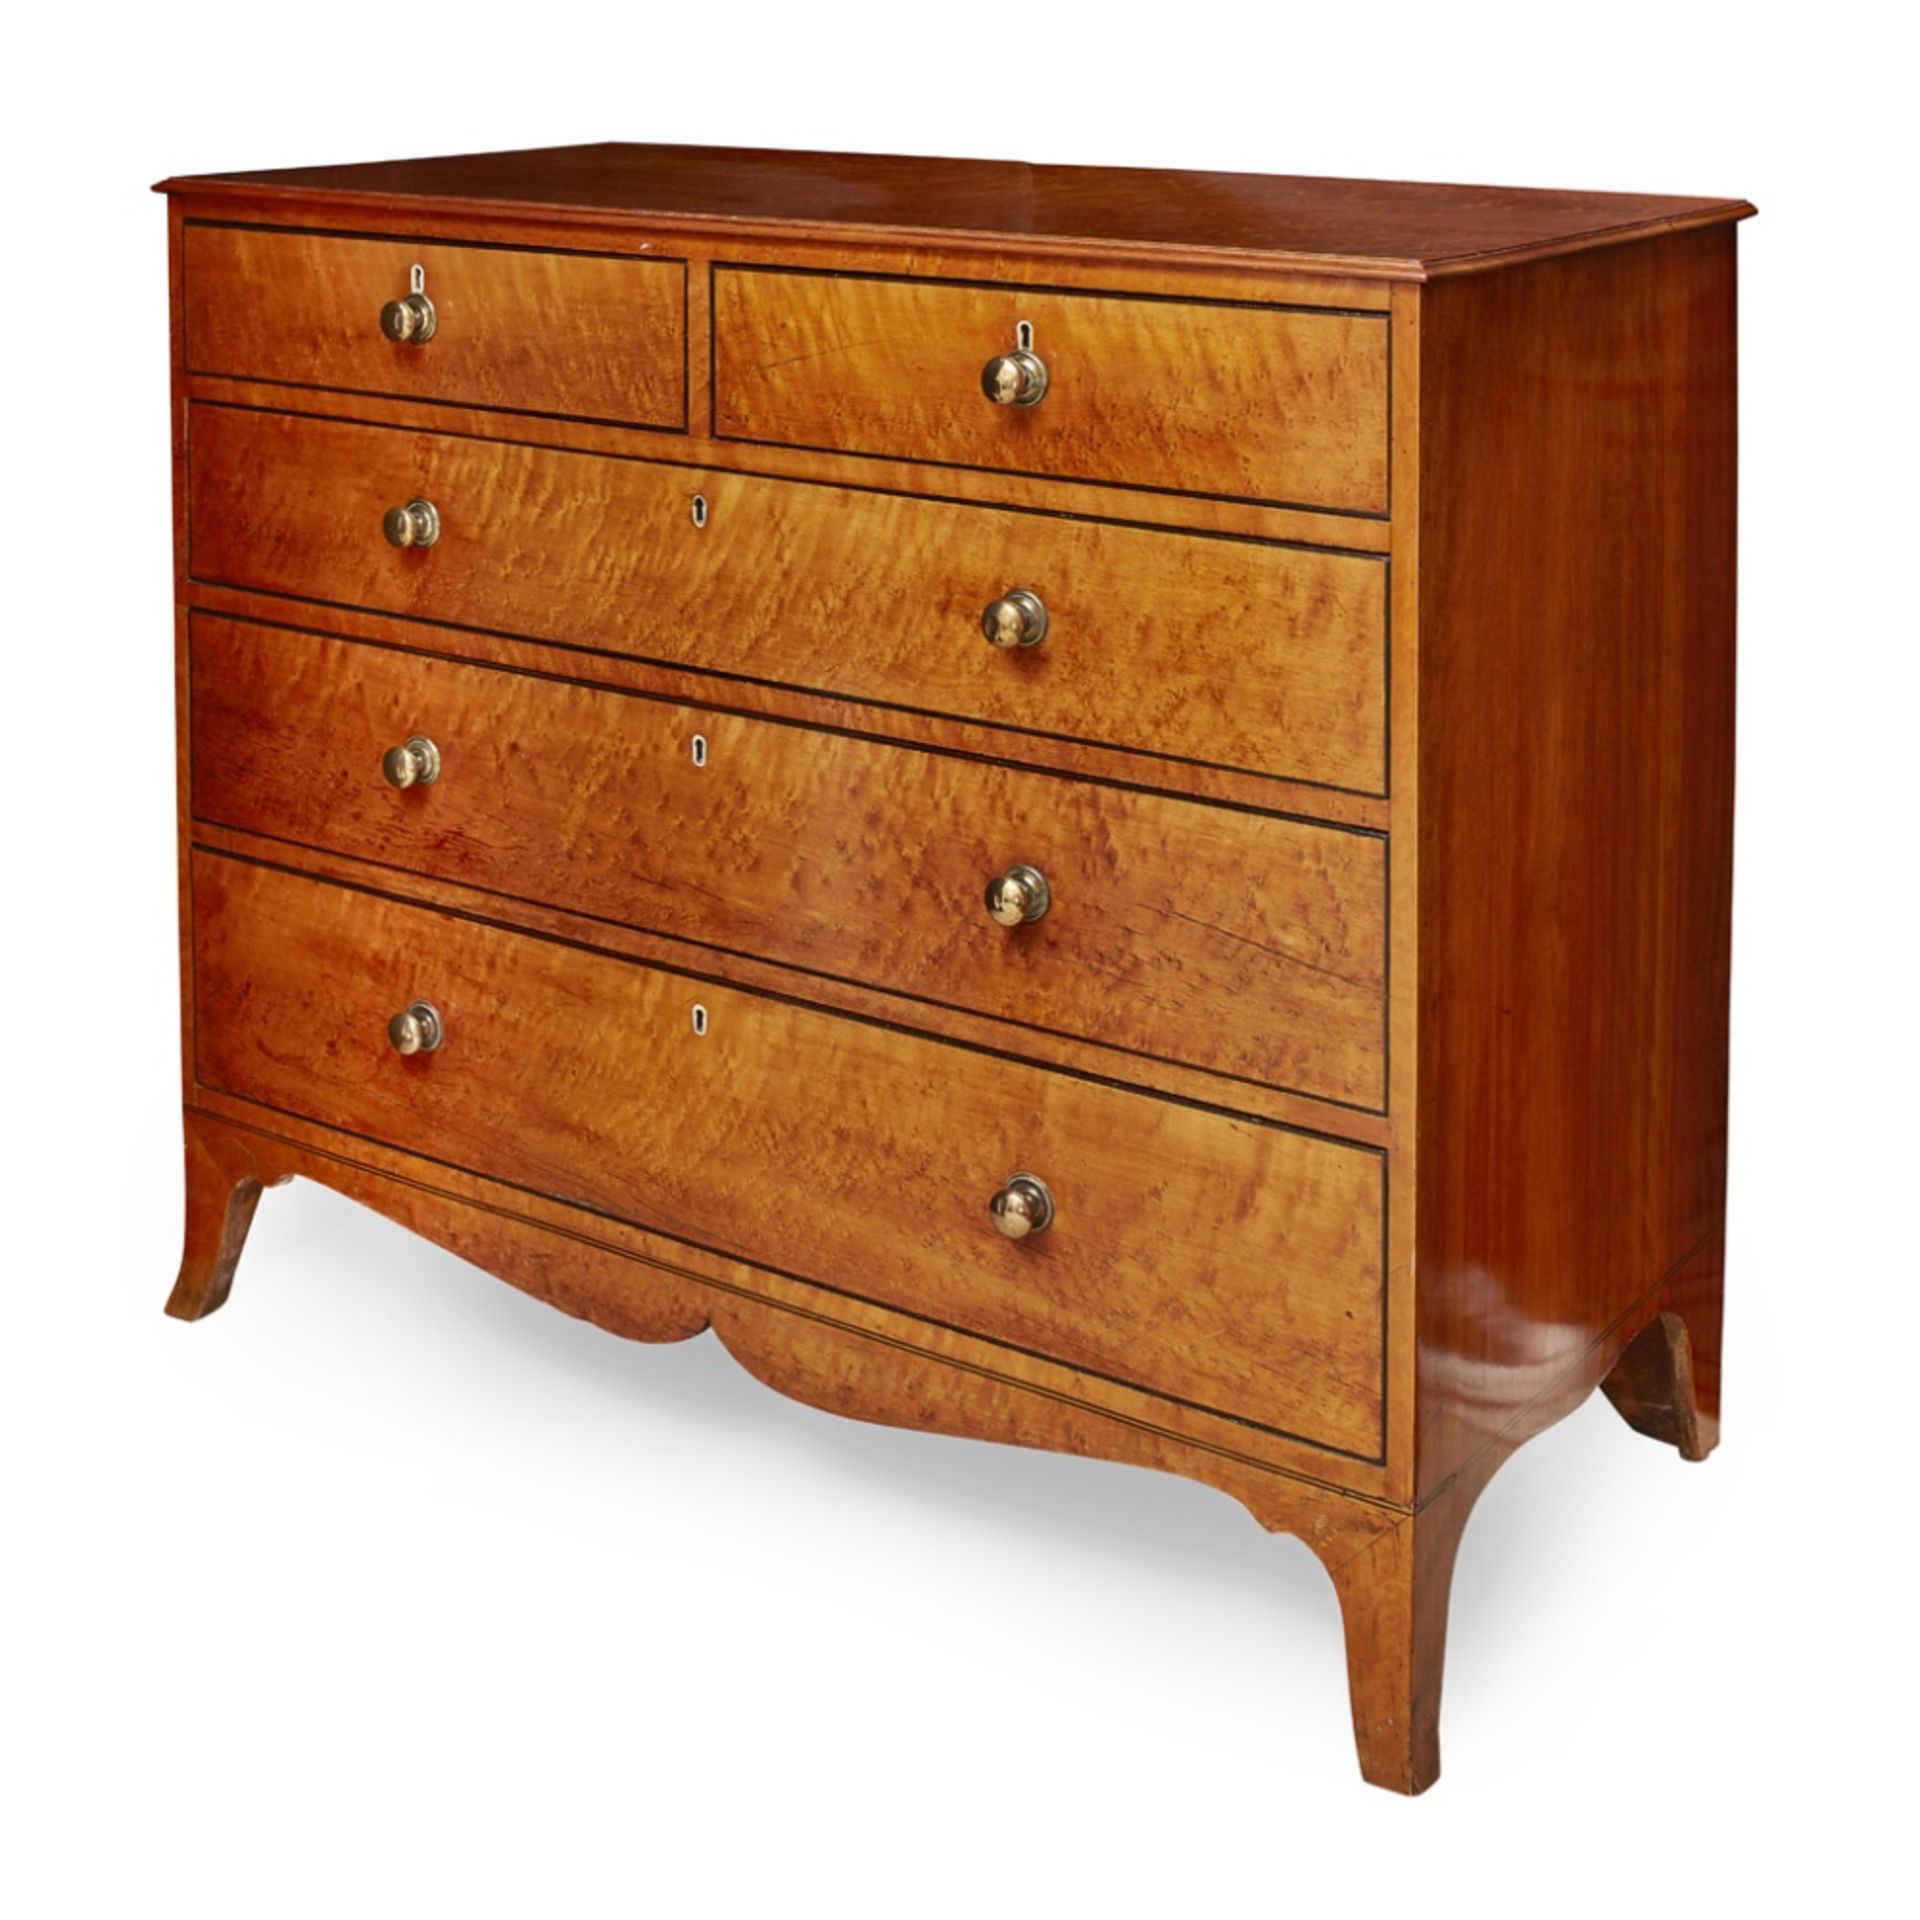 REGENCY BIRDSEYE MAPLE CHEST OF DRAWERS EARLY 19TH CENTURY - Image 2 of 2